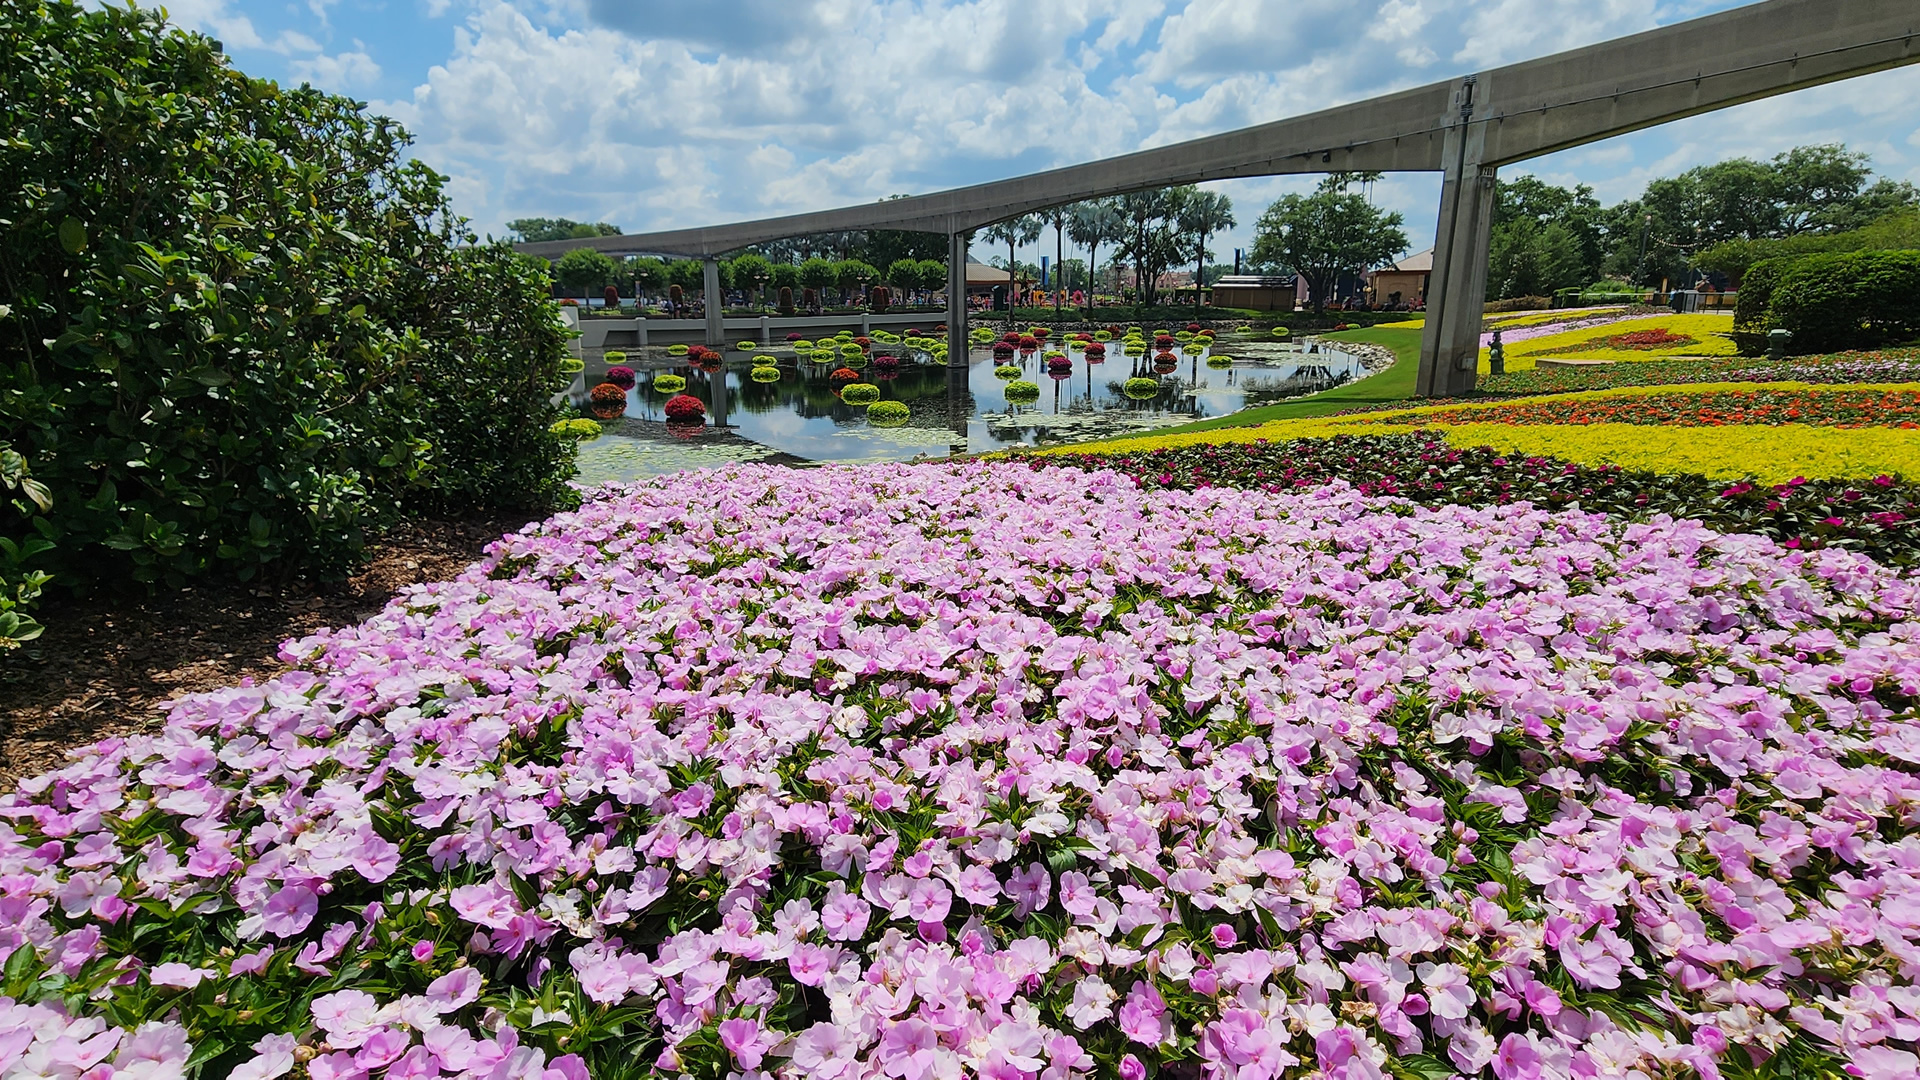 Flowers at Epcot Flower and Garden Festival